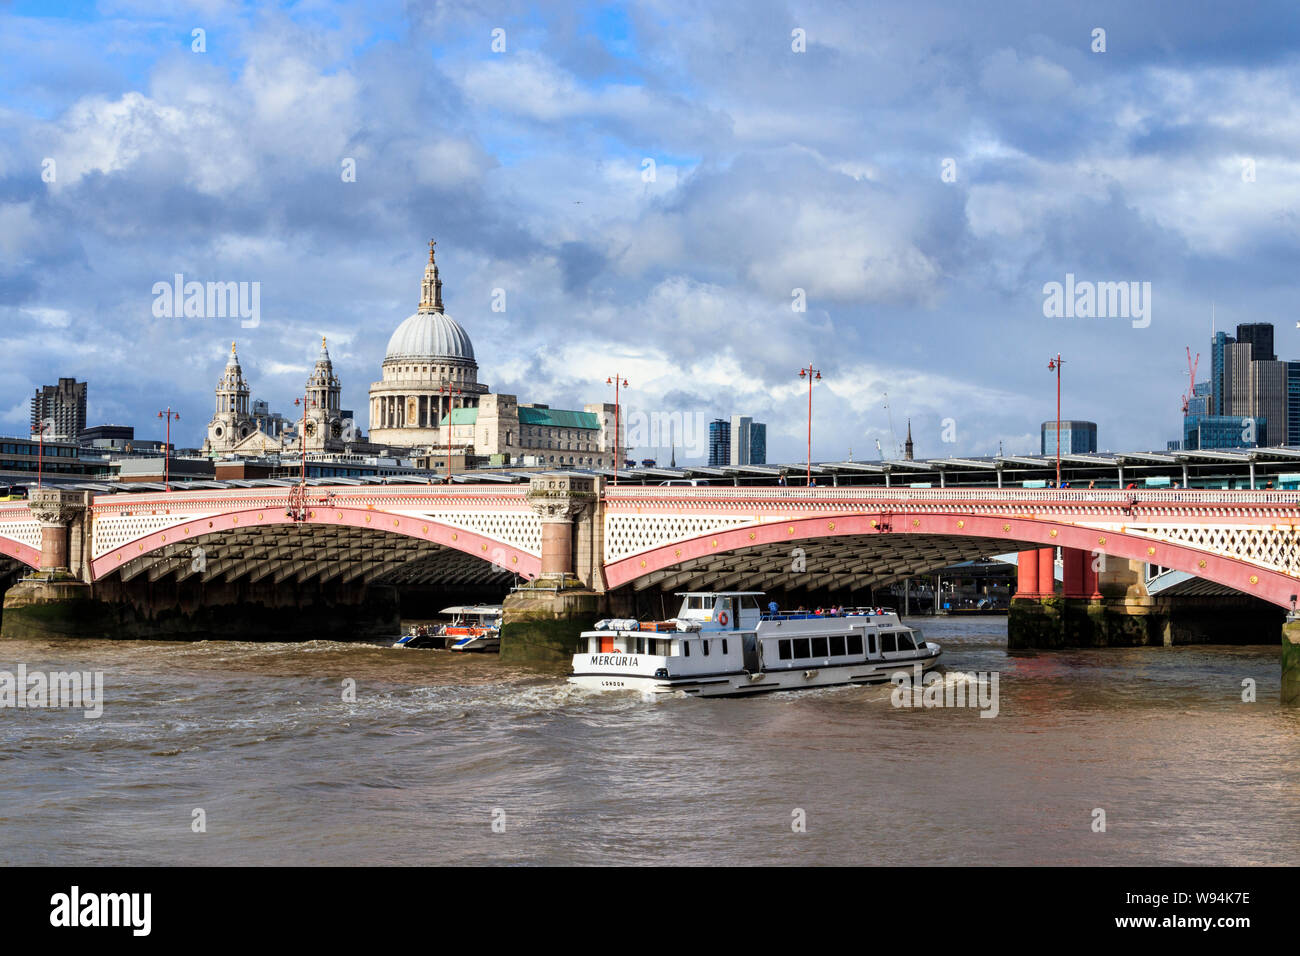 A sightseeing boat passes beneath Blackfriars Bridge on the River Thames, St Paul's Cathedral in the background, London, UK Stock Photo